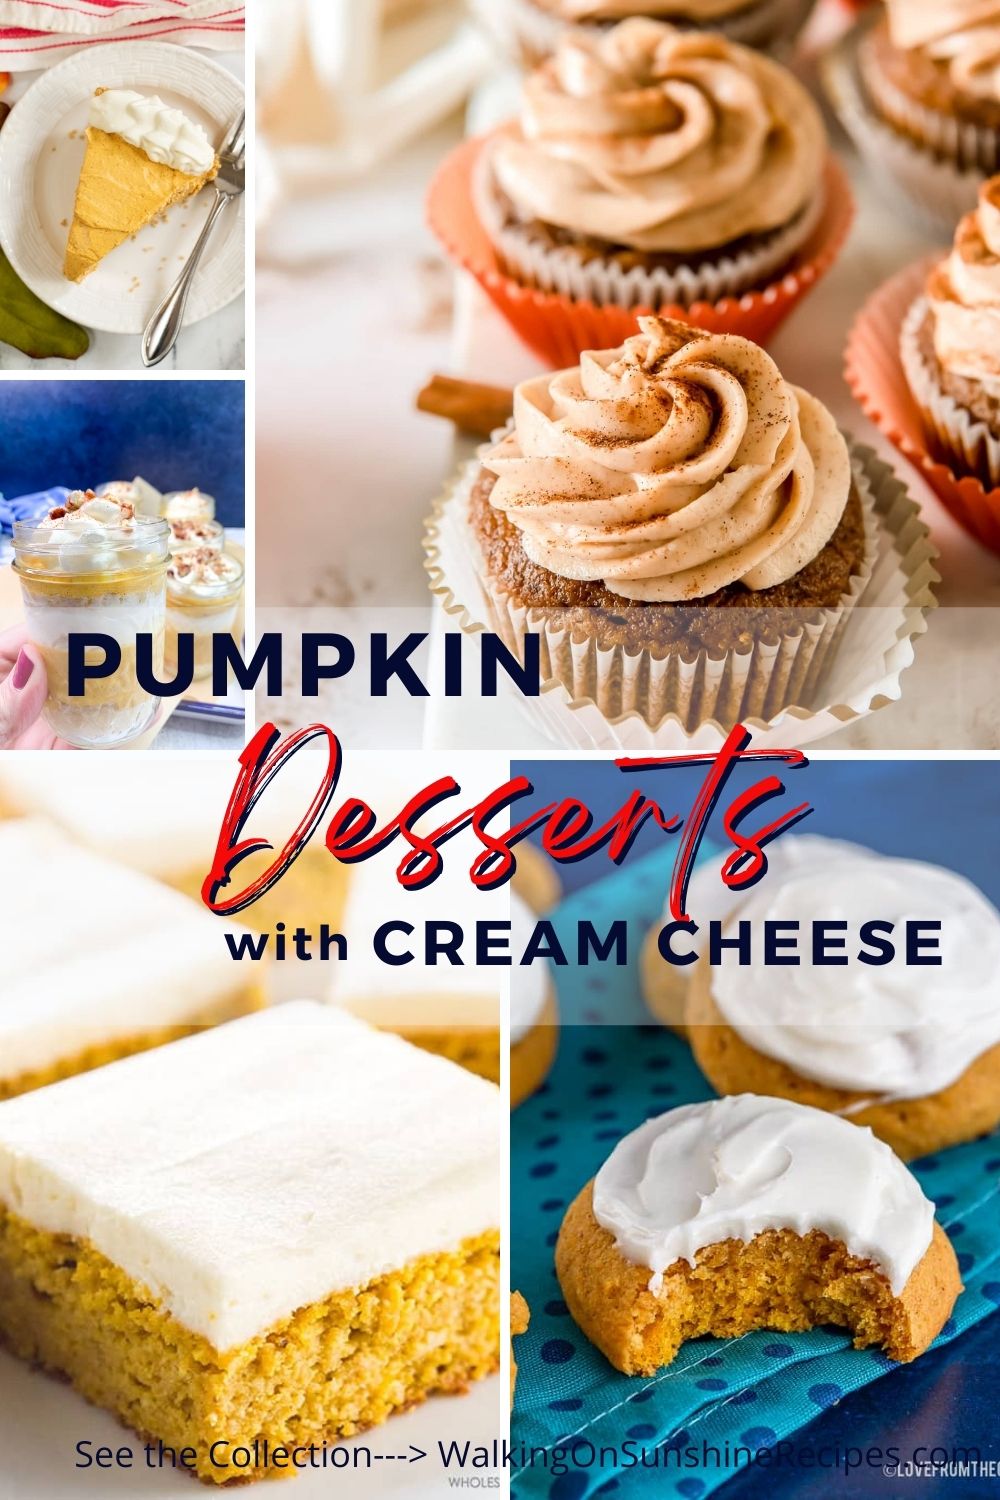 collection of pumpkin desserts with cream cheese.